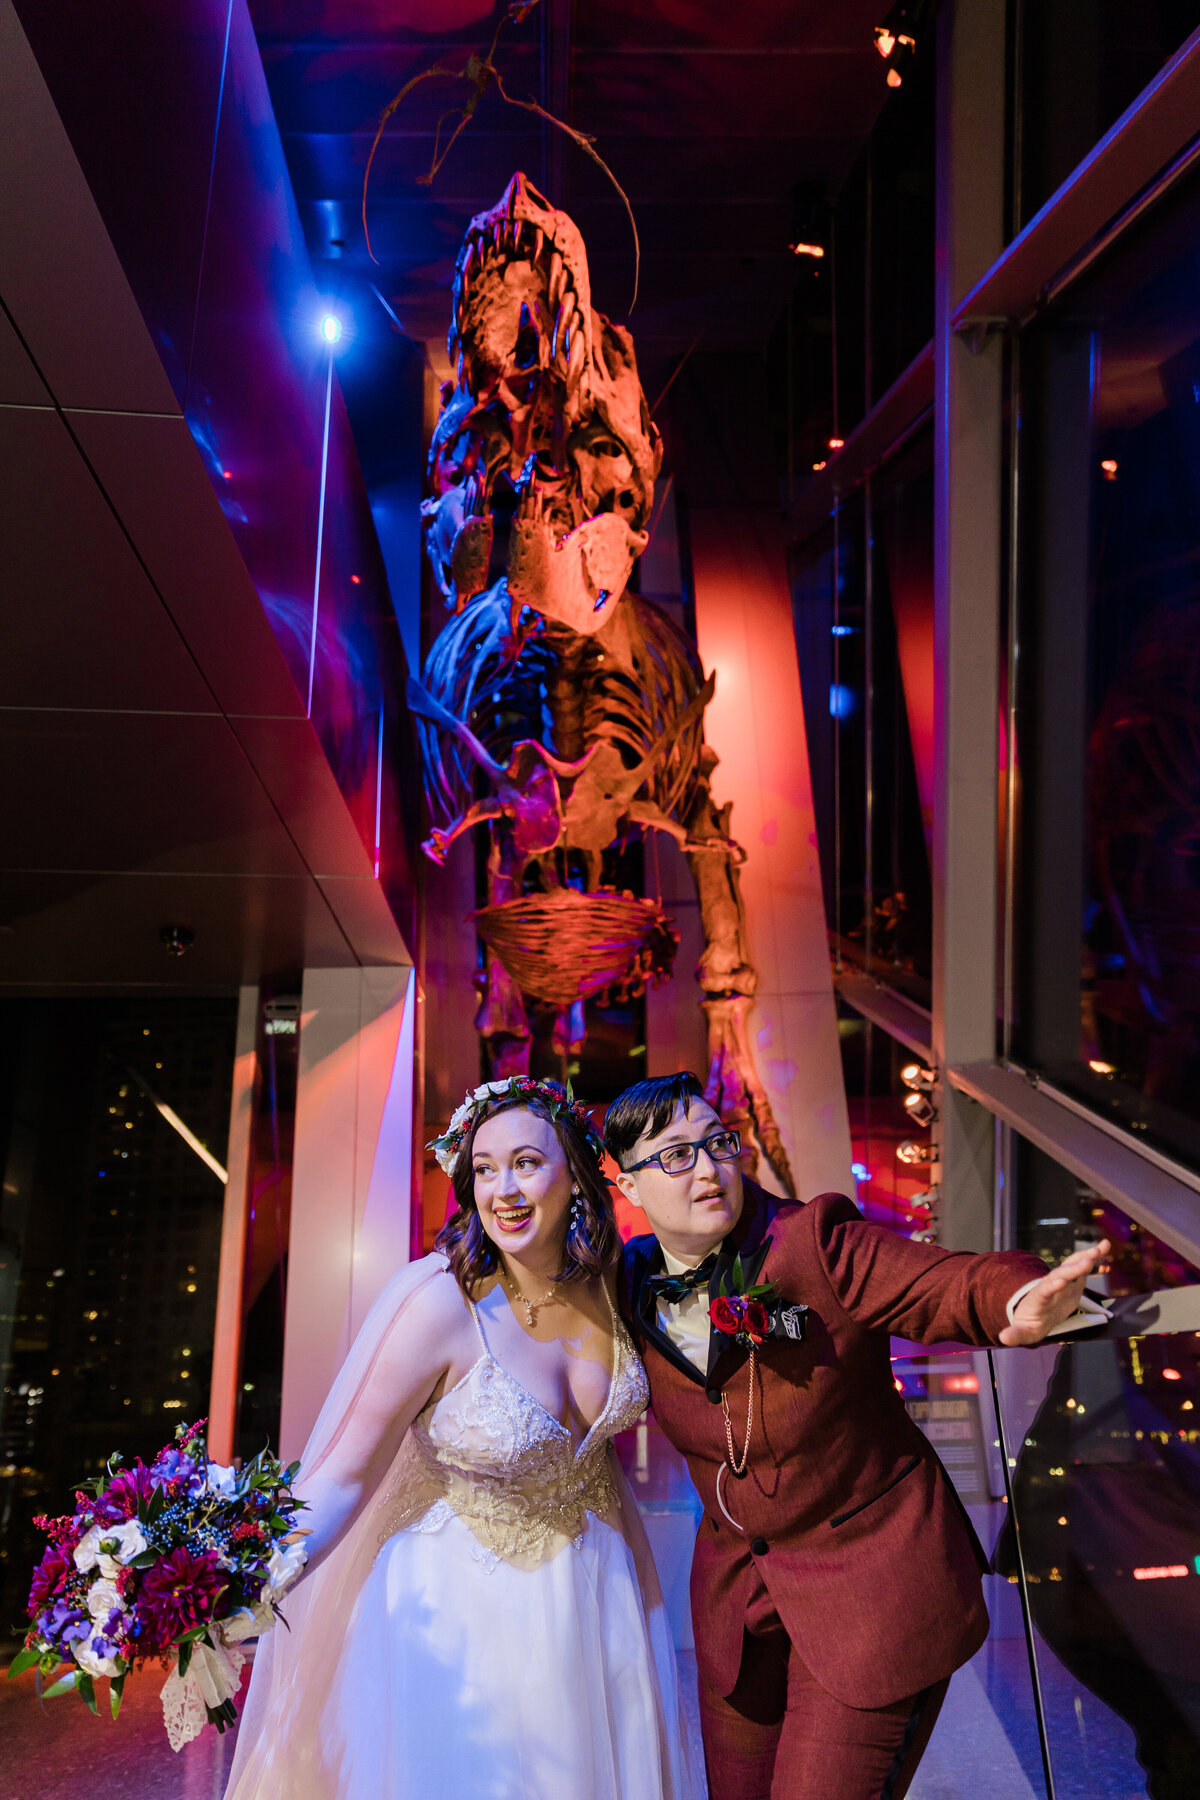 Portrait of two brides playfully posing underneath a tyrannosaur rex skeleton after their wedding at the Perot Museum of Nature and Science  in Dallas, Texas. The bride on the left is wearing a long, intricate, white dress with a flower crown and veil while holding a bouquet. The bride on the right is wearing a burgundy suit with a bowtie and boutonniere. The skeleton above them is bathed in colorful light.